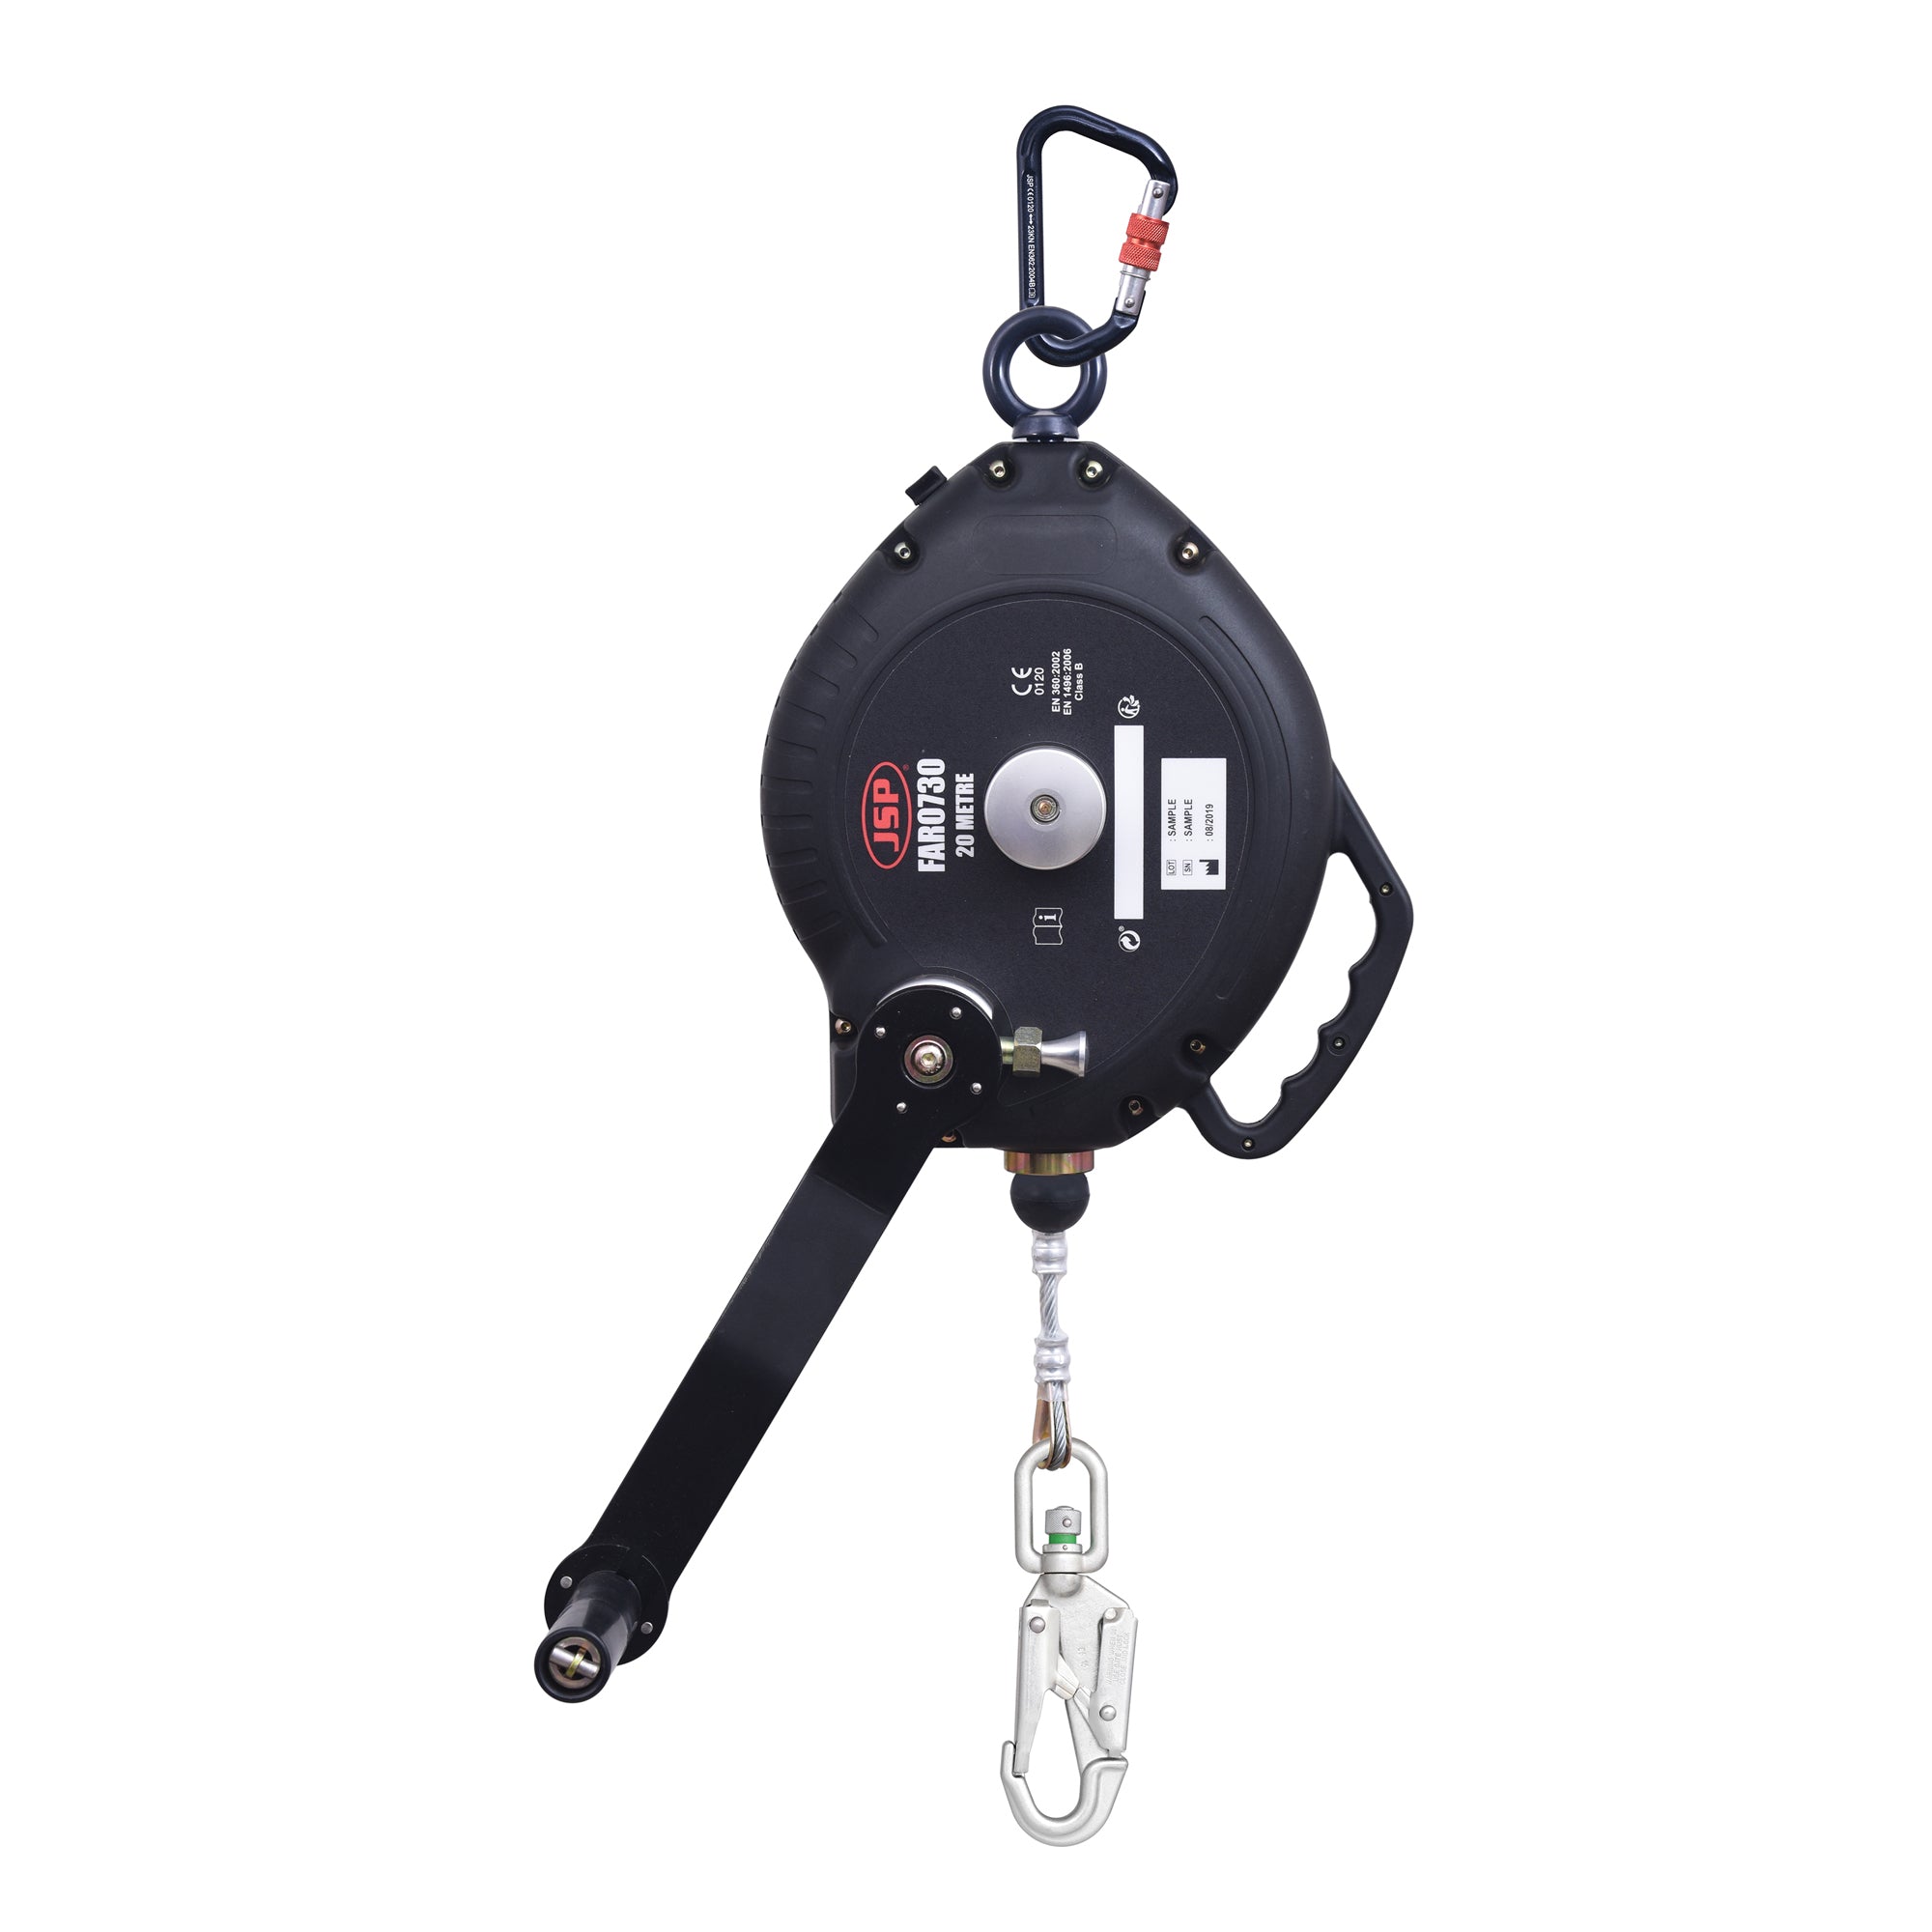 JSP 20m Wire Self Retractable Lifeline - Integrated Winch for Rescue